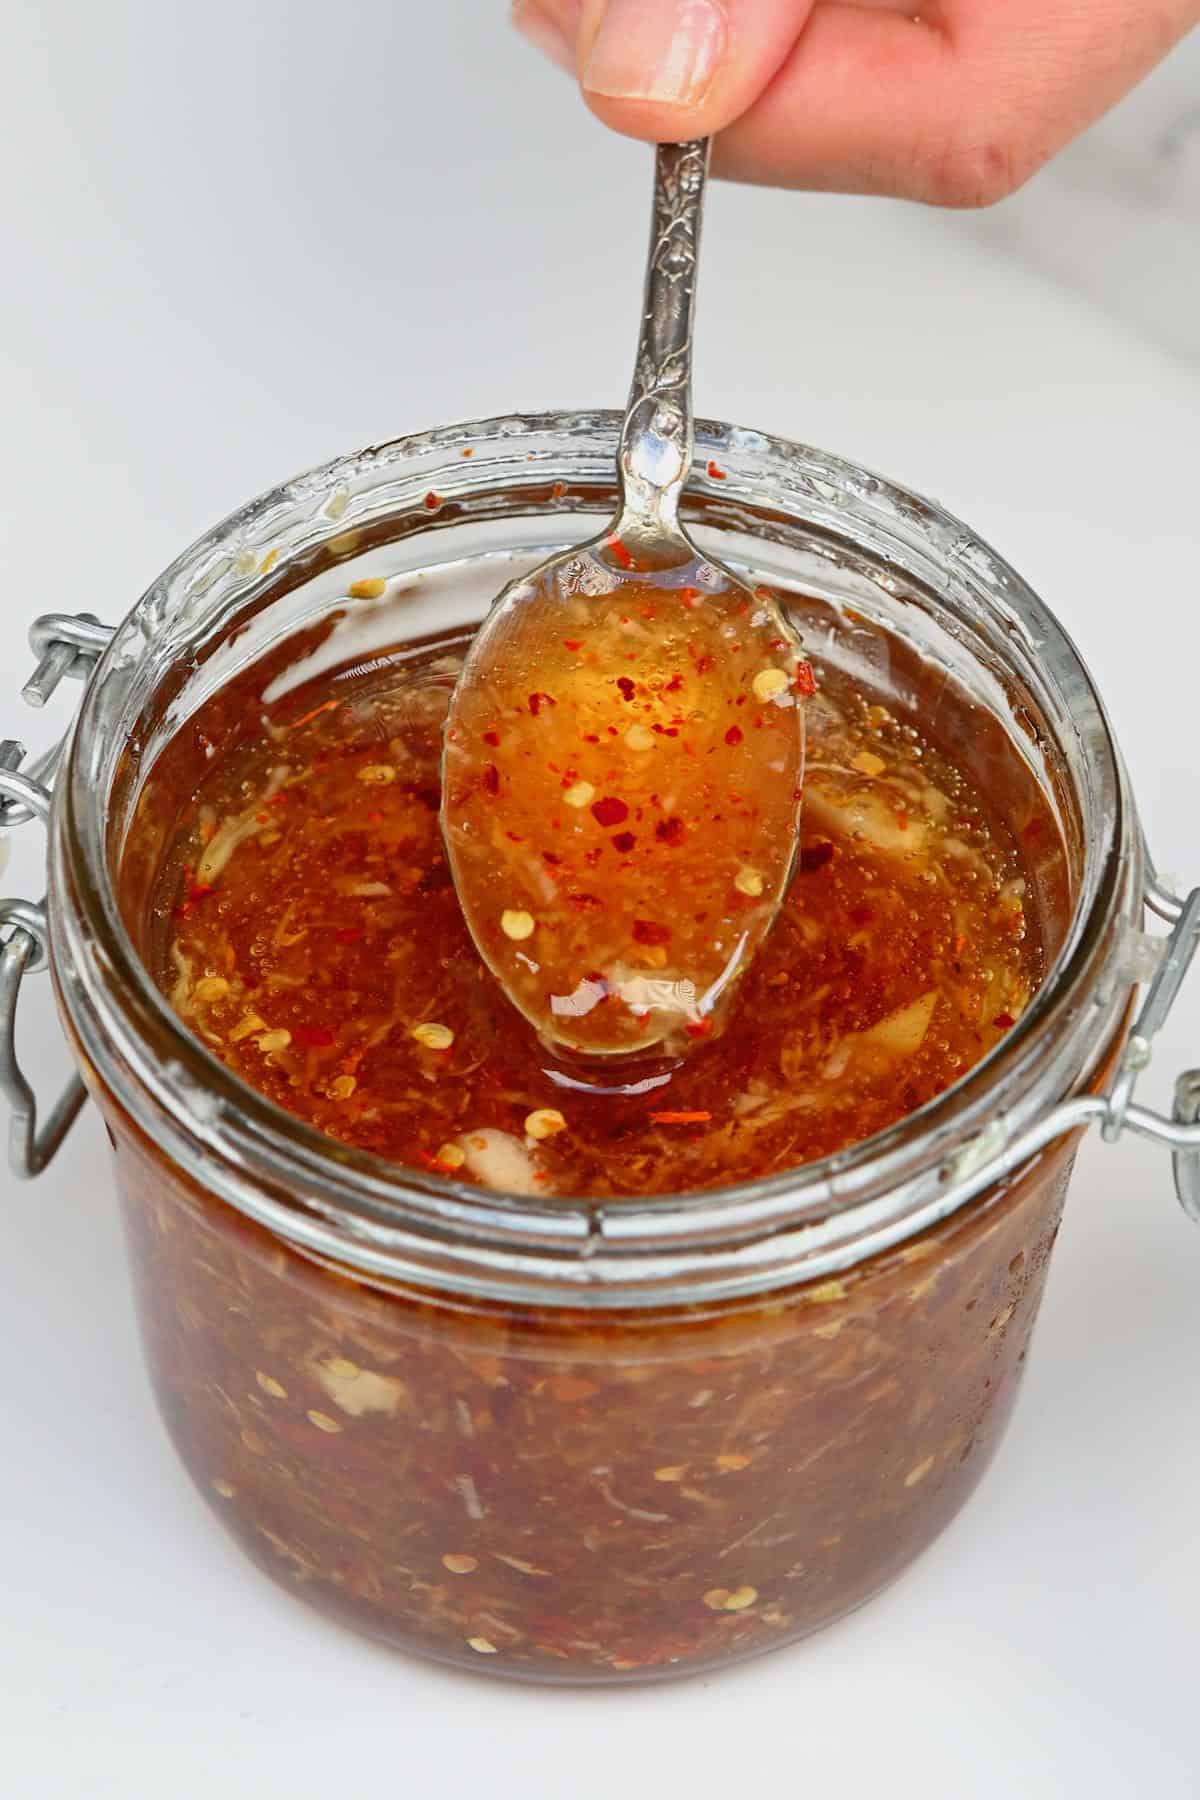 A spoonful of garlic chili honey over a jar